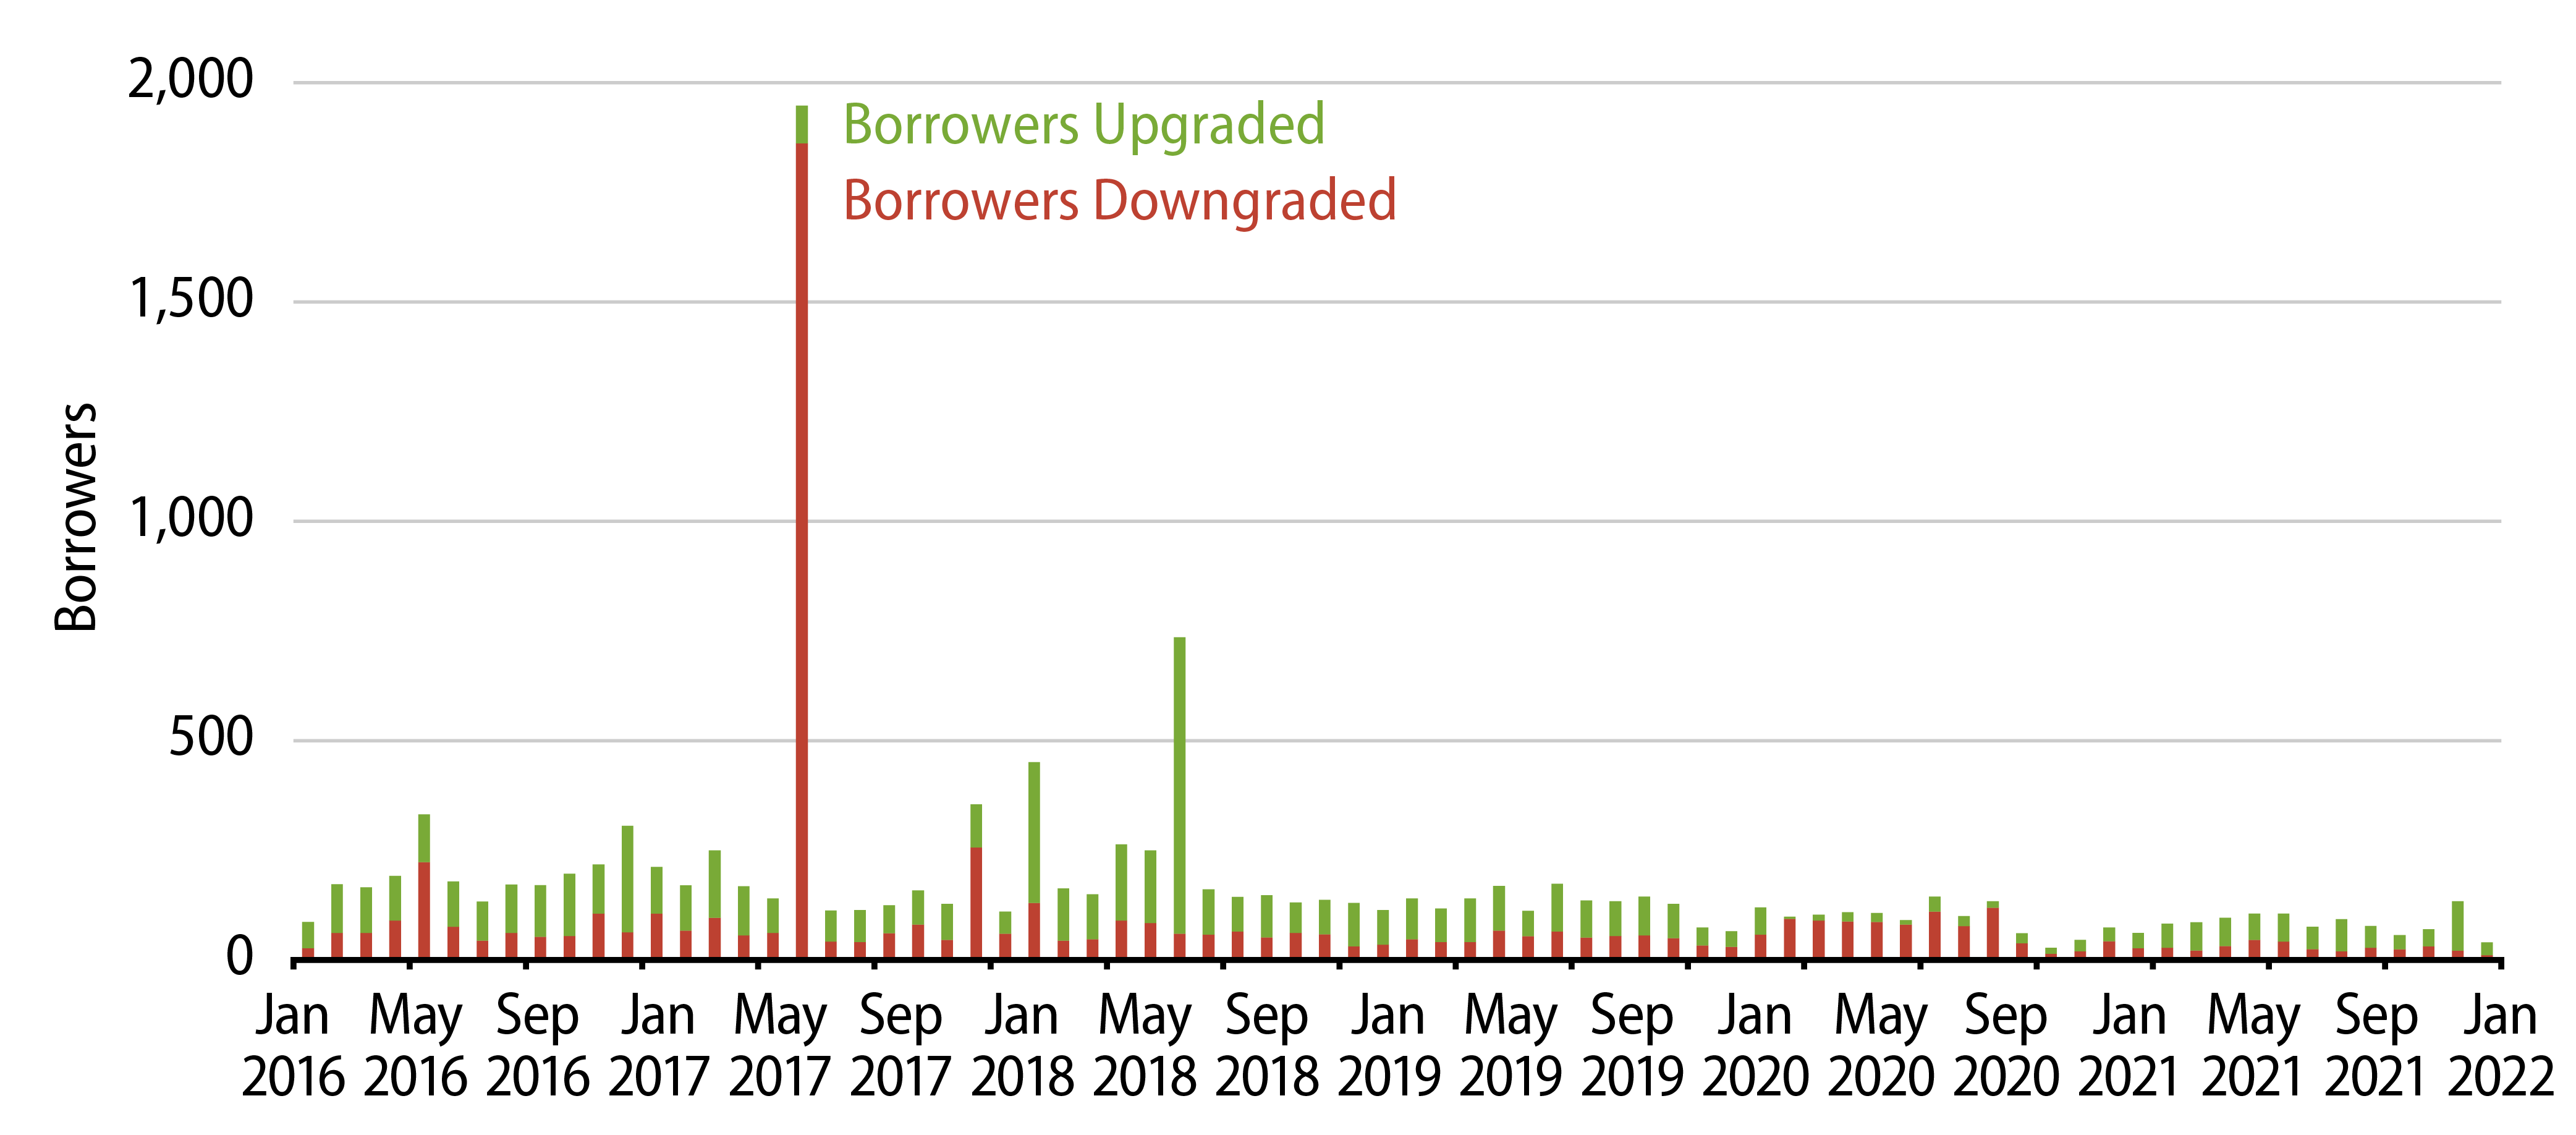 Explore Number of Borrowers Upgraded vs. Downgraded